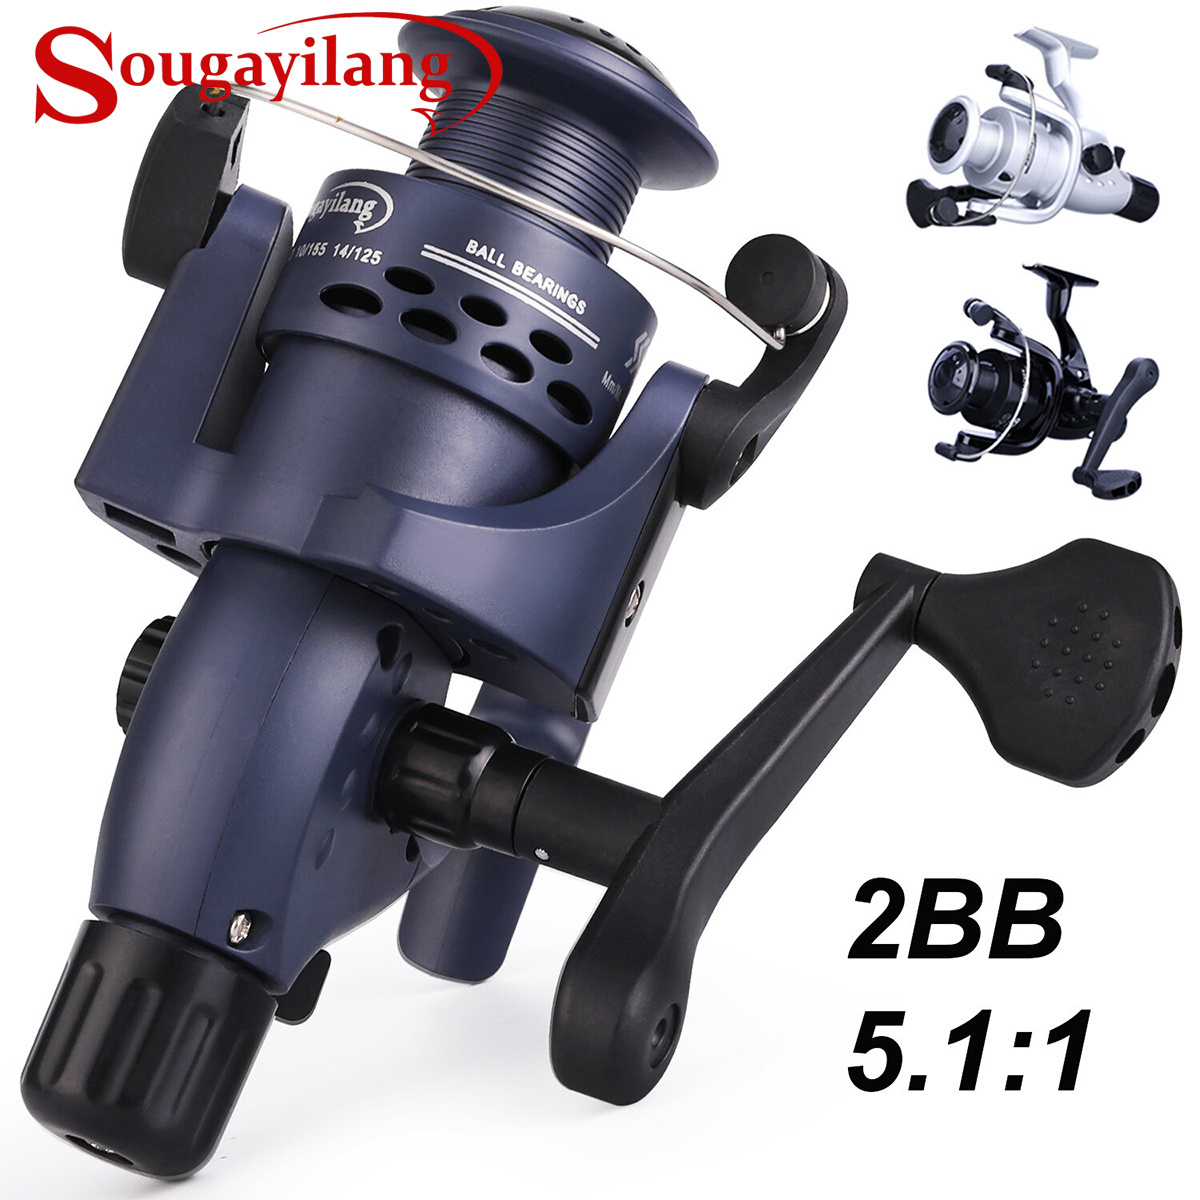 

Sougayilang 4000 Series Spinning Reel, 5.1:1 Gear Ratio 2bb Fishing Reel, Suitable For Freshwater